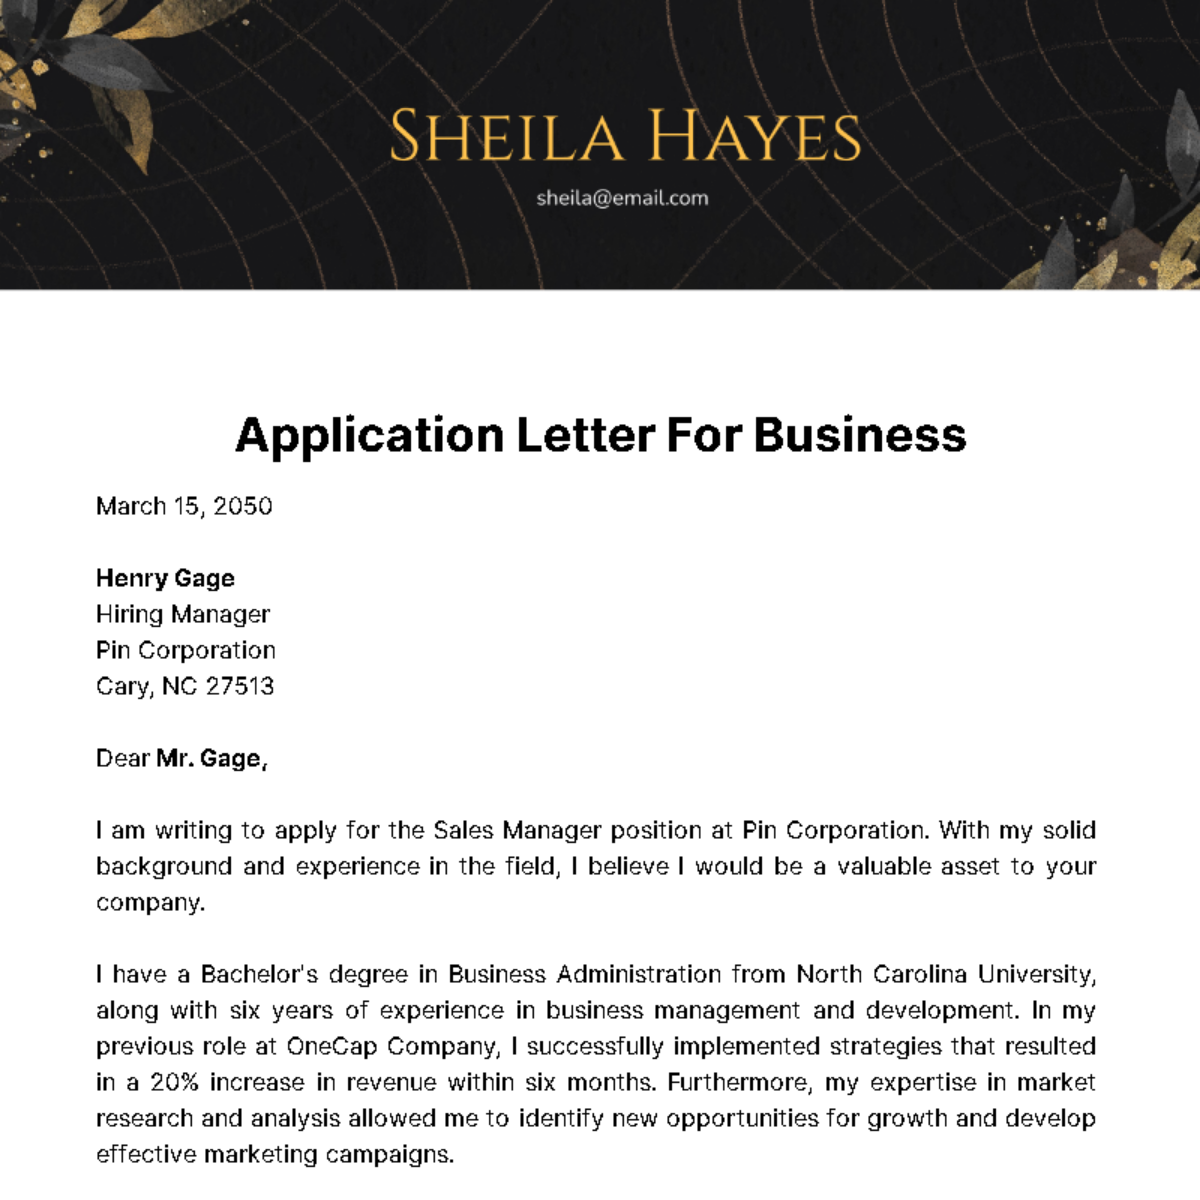 Free Application Letter for Business Template